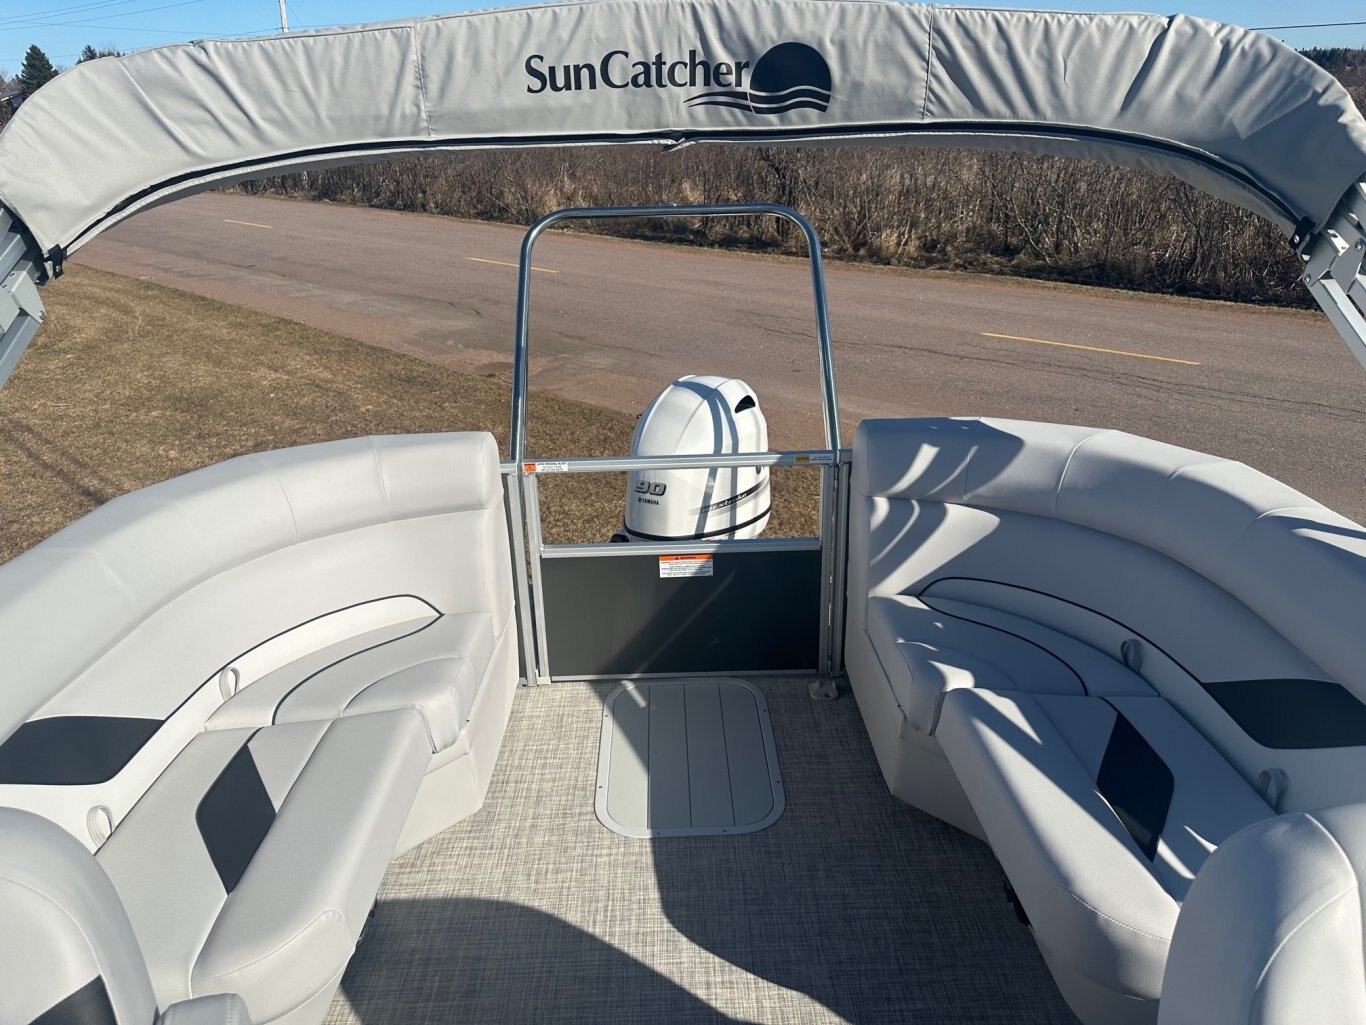 2024 SunCatcher Select 20RC & Trailer with a White Yamaha F70hp Motor